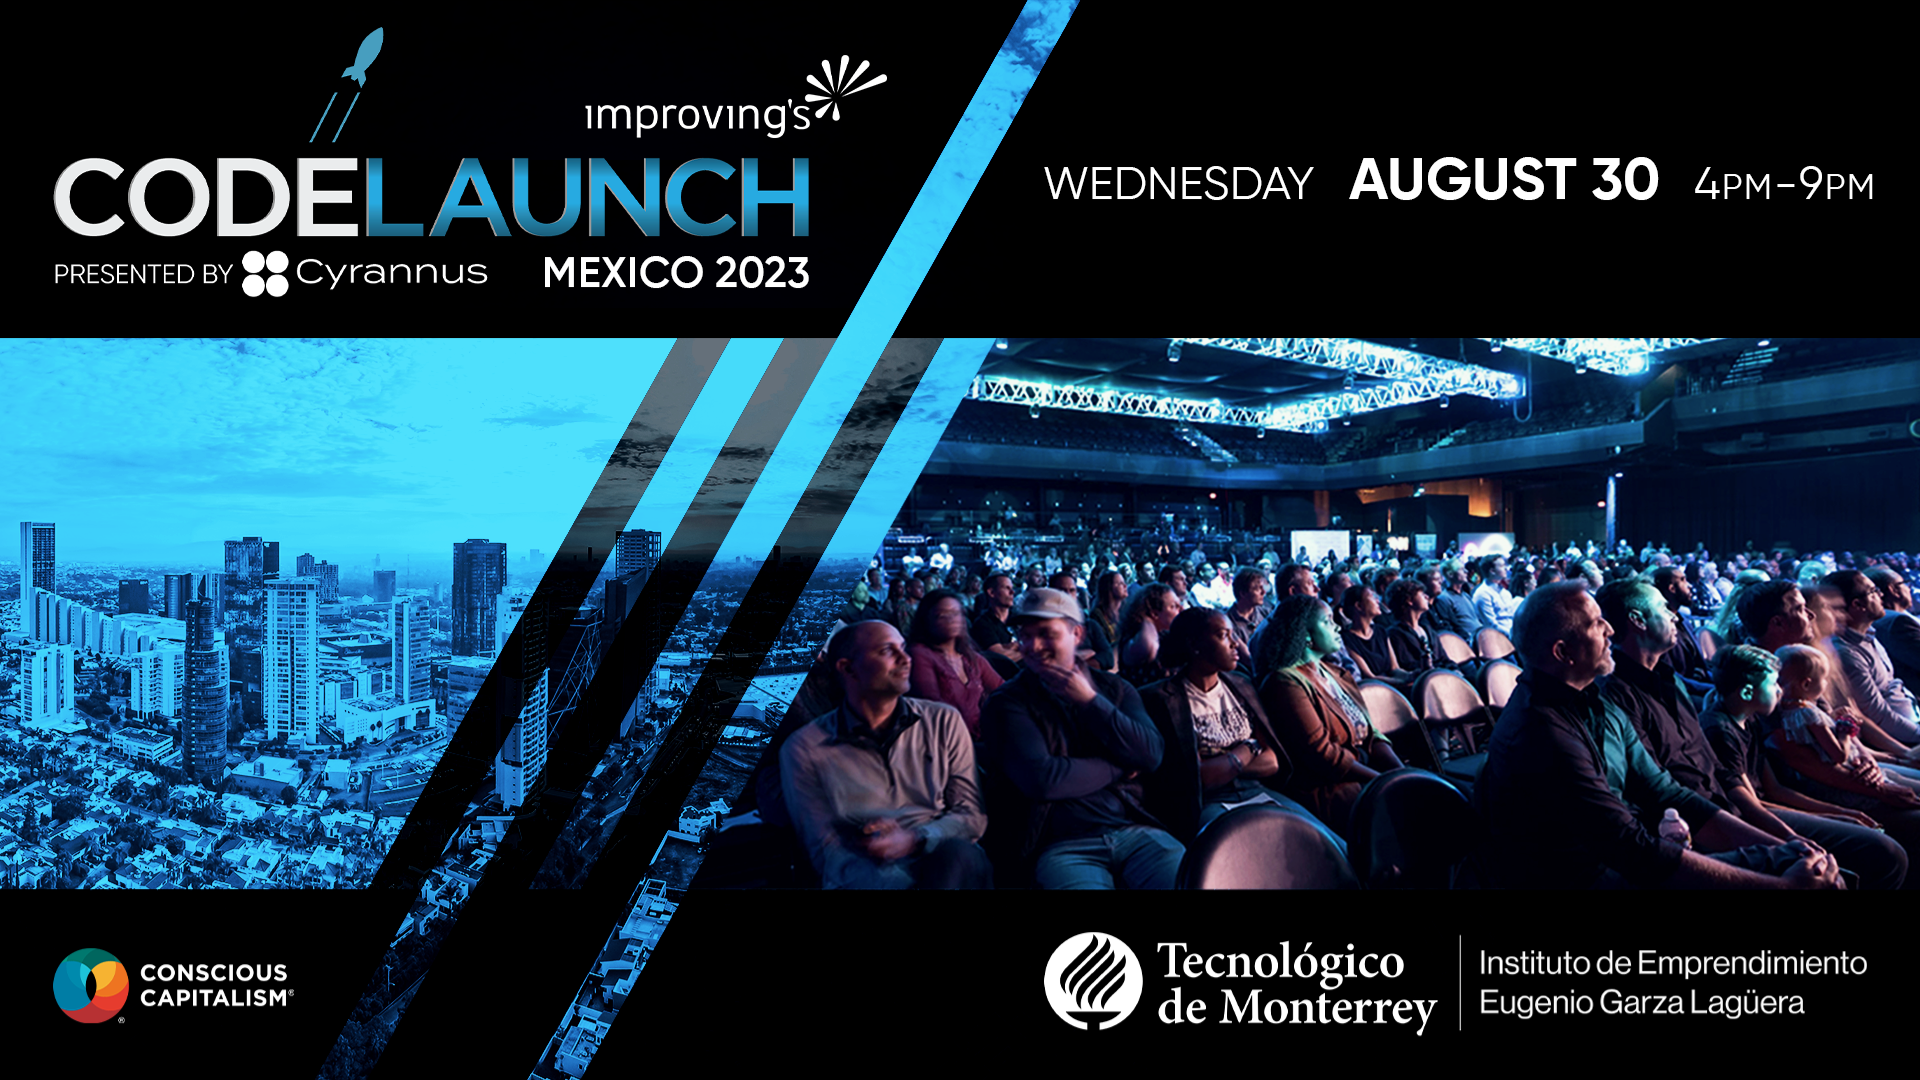 The Rising Stars of Innovation: Meet the Finalists of CodeLaunch Mexico 2023!